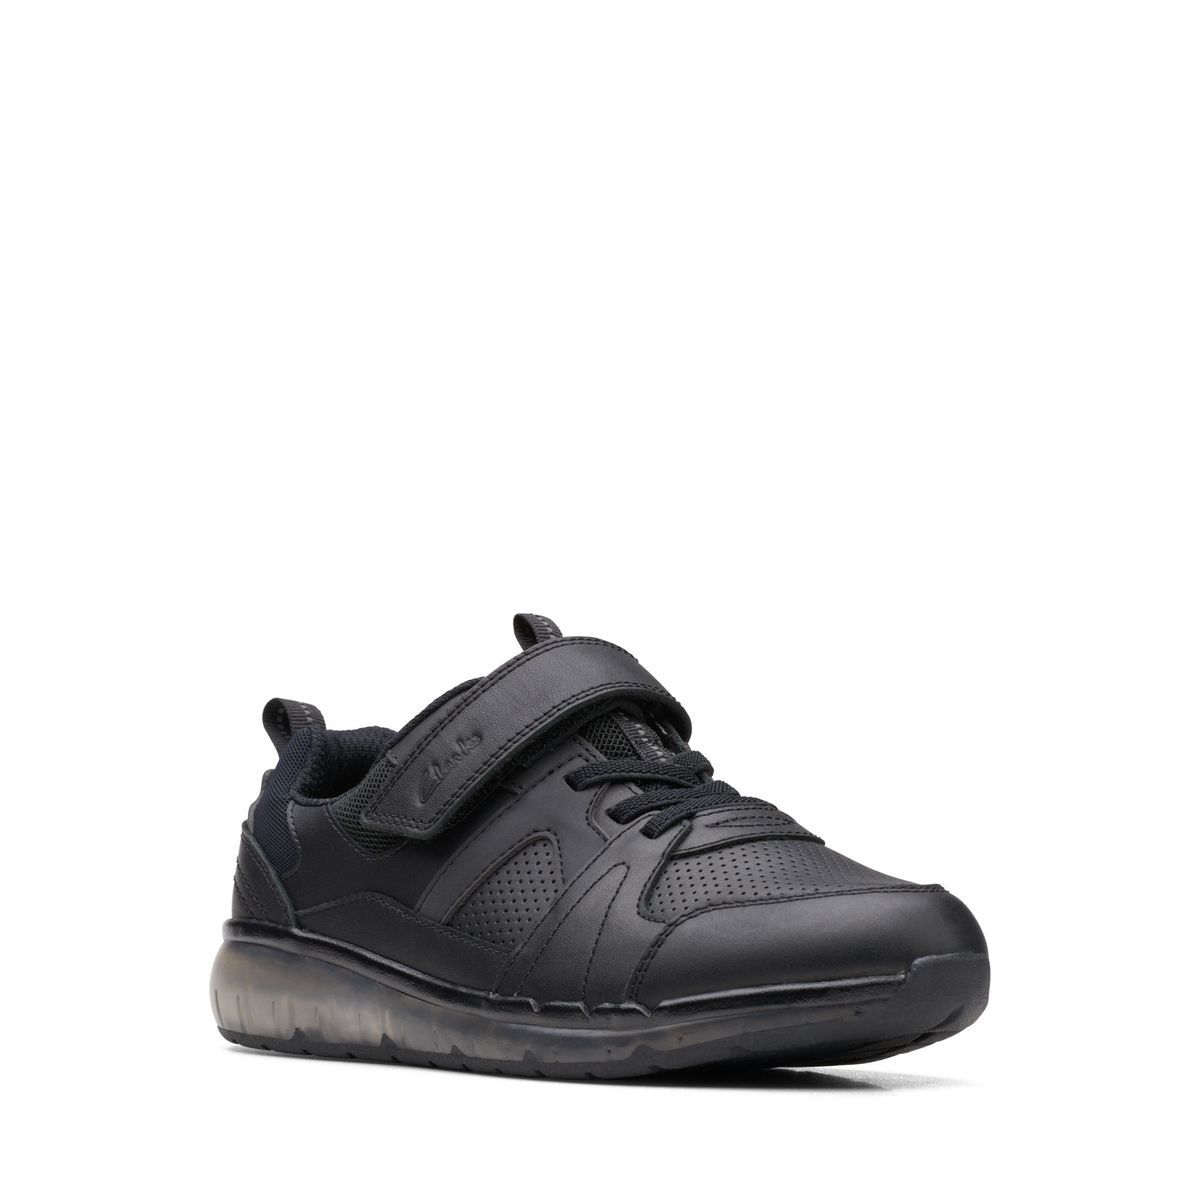 Clarks Spark Beam O Black Leather Kids Boys Trainers 679186F In Size 13.5 In Plain Black Leather F Width Fitting Regular Fit For kids